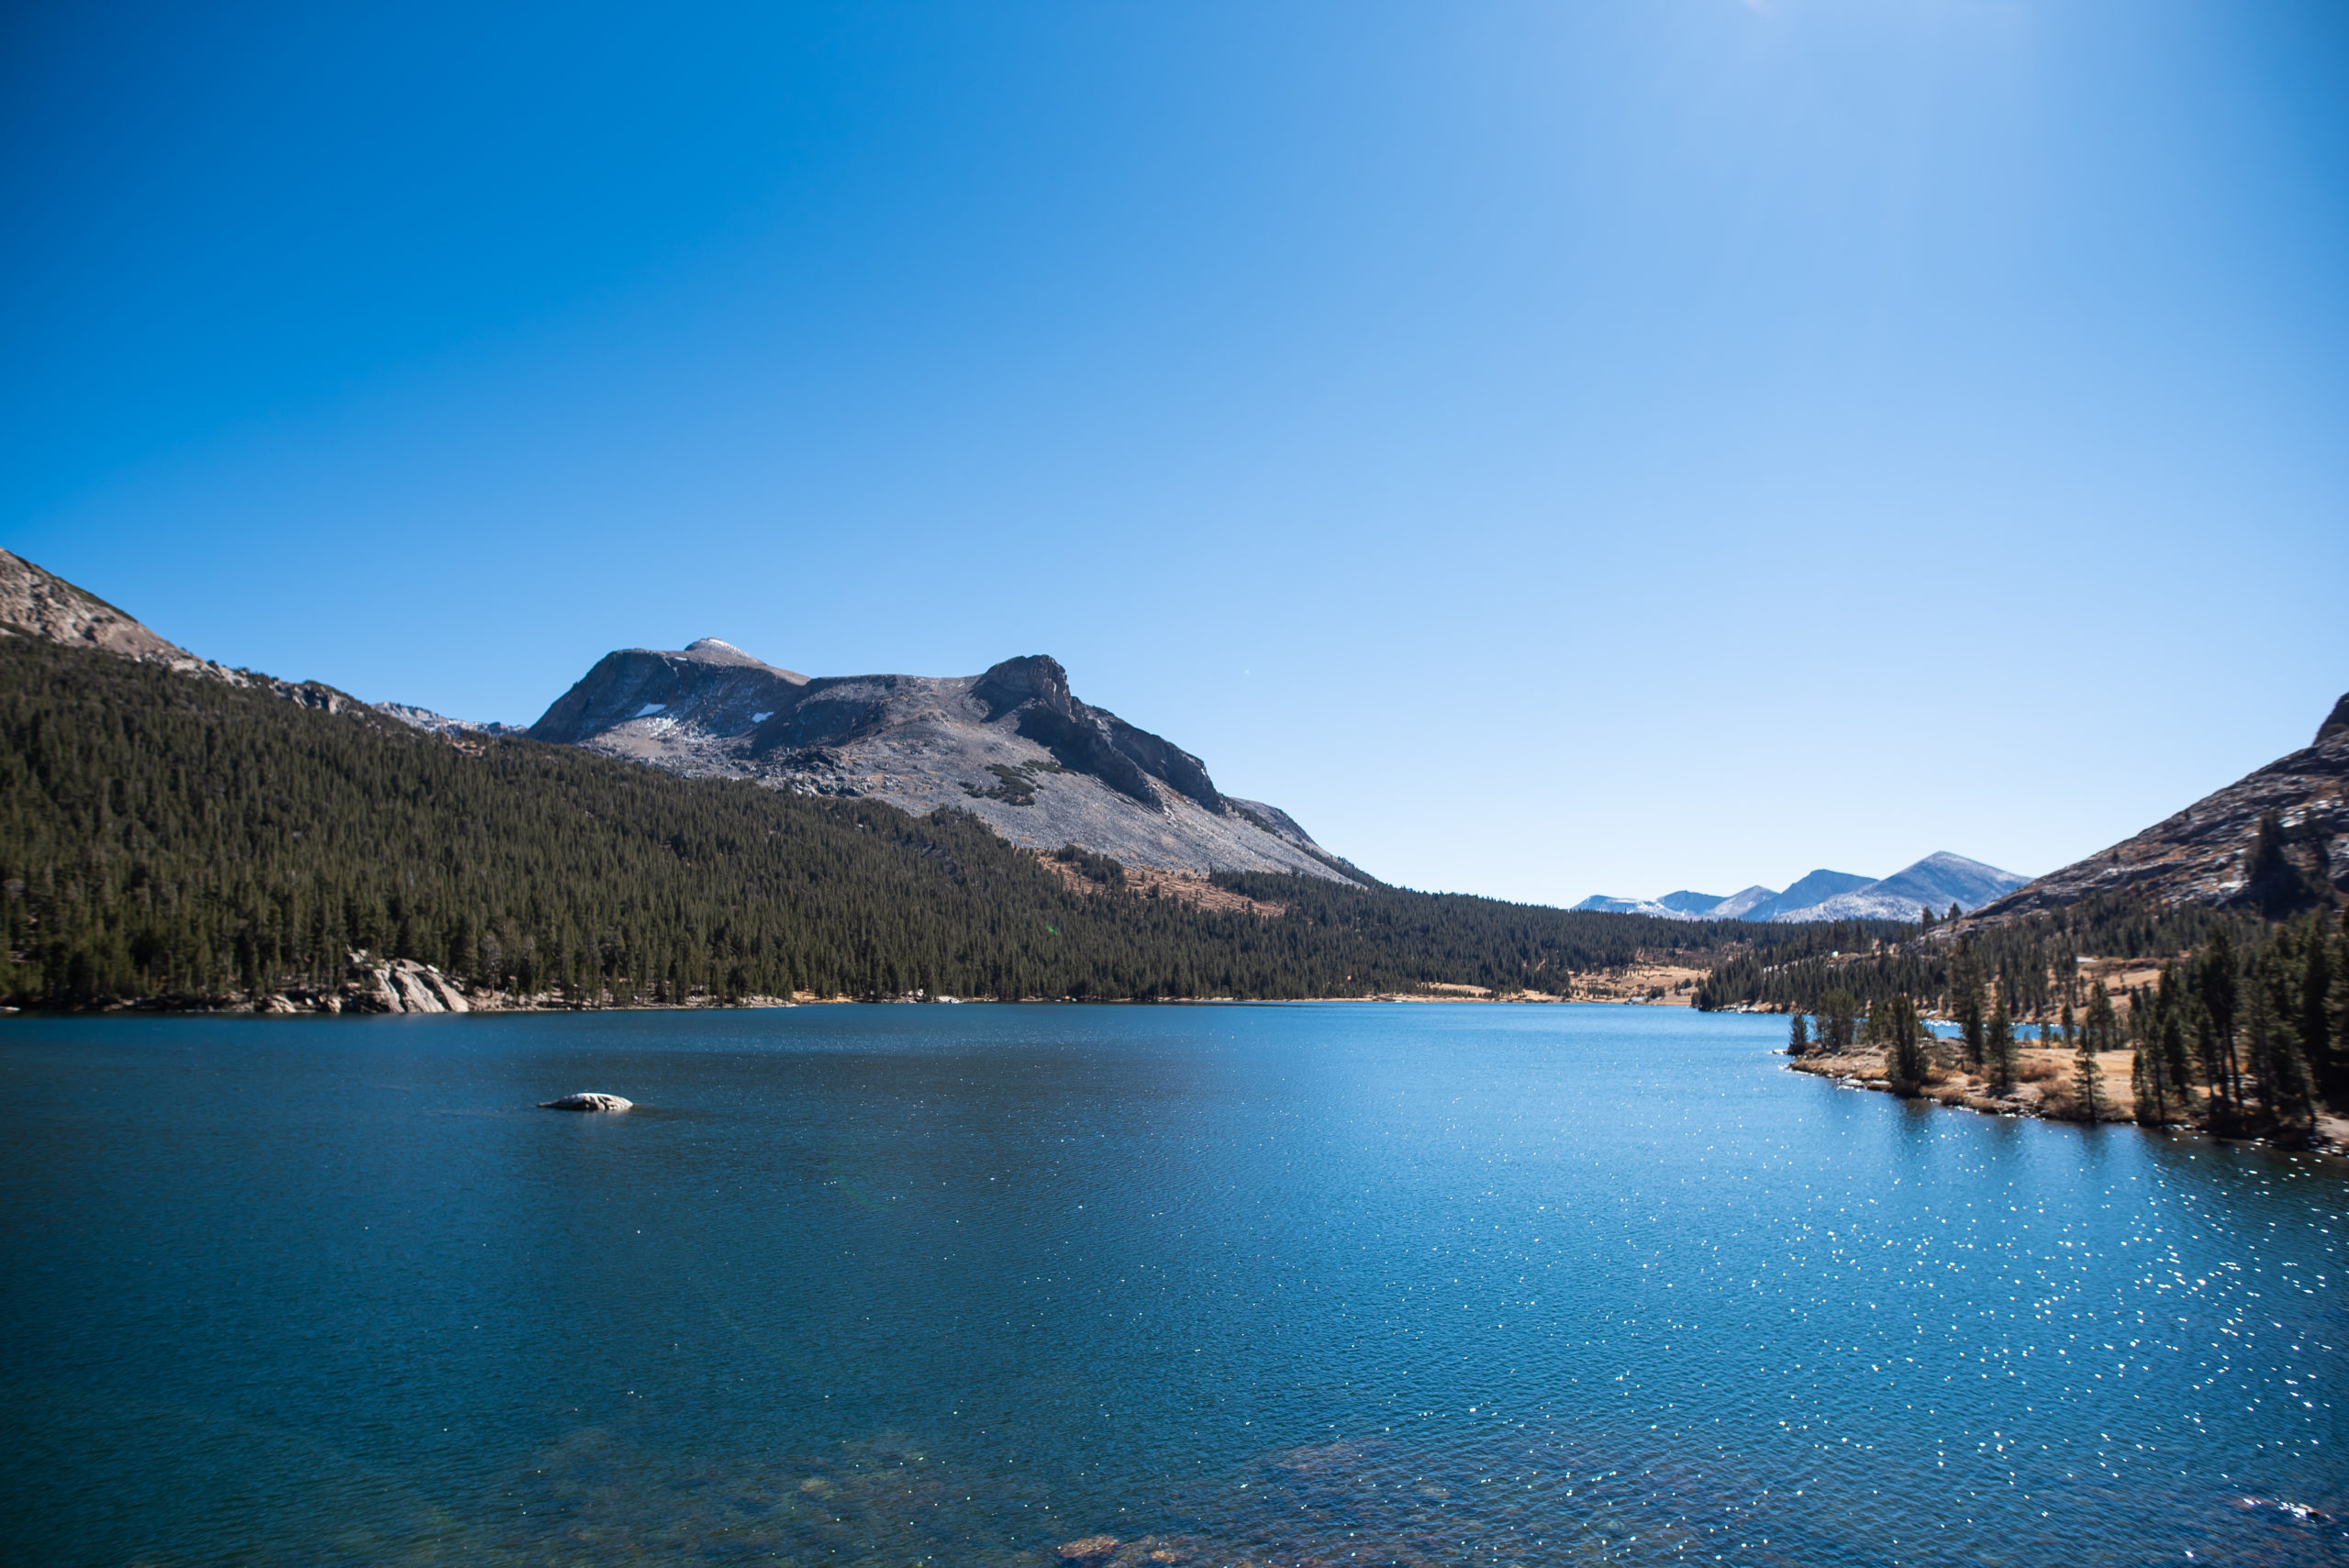 The pristine blue lake and landscape at Sandpoint, one of the best elopement destinations in Idaho